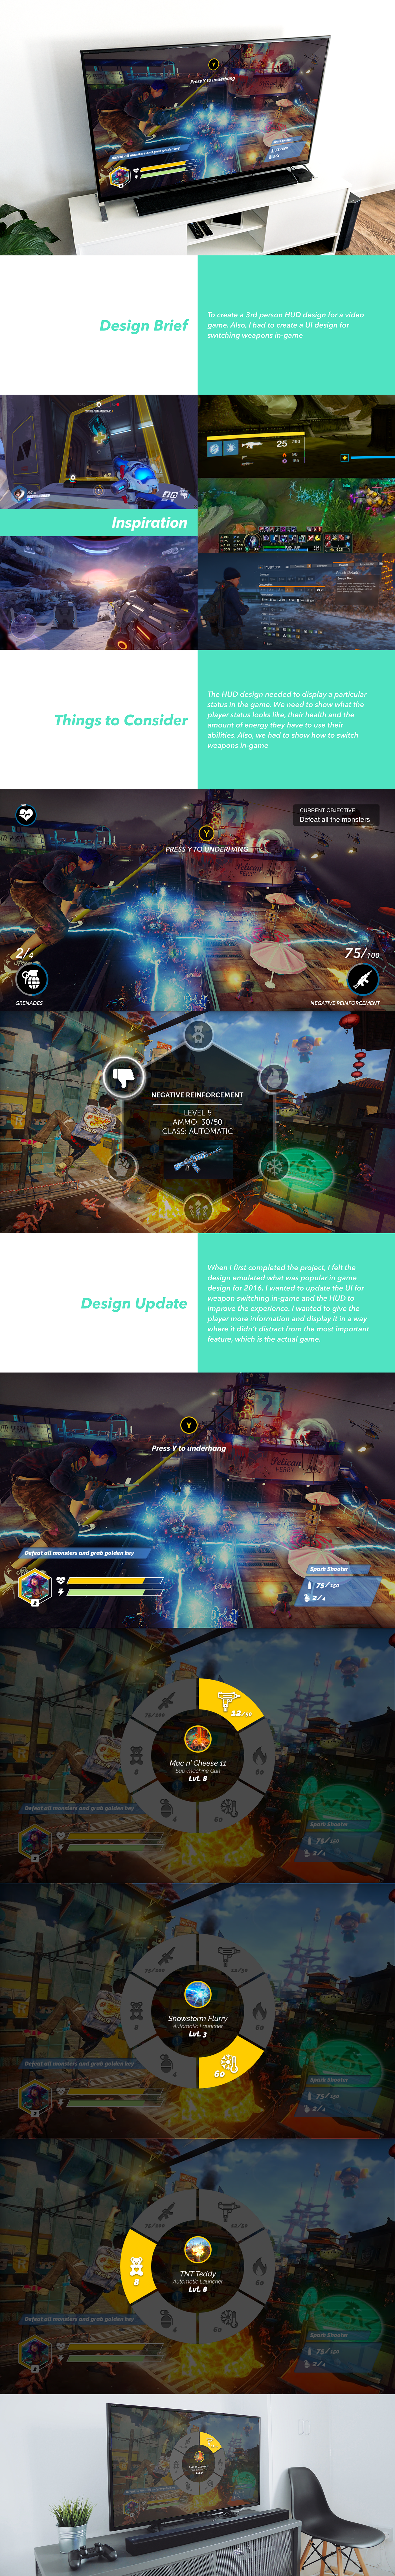 game HUD design UI ux Interface interaction visual ability energy